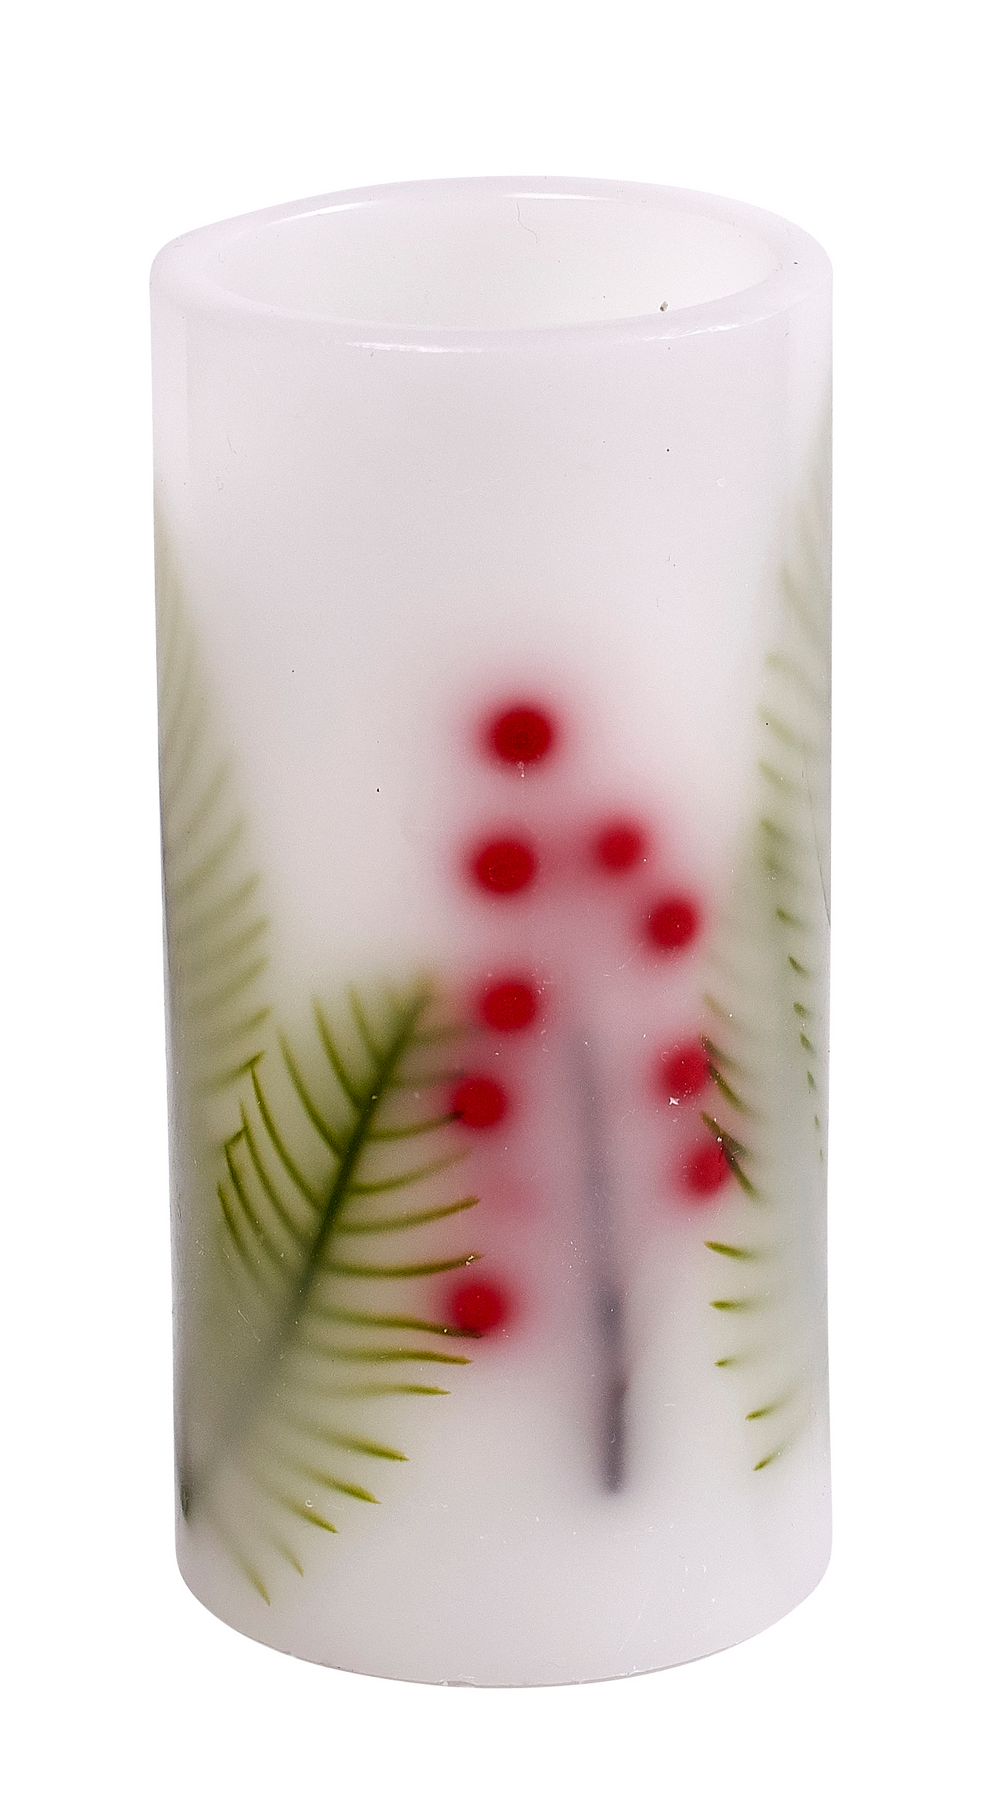 LED Candle with berries and pine needles embedded from CTA, Inc